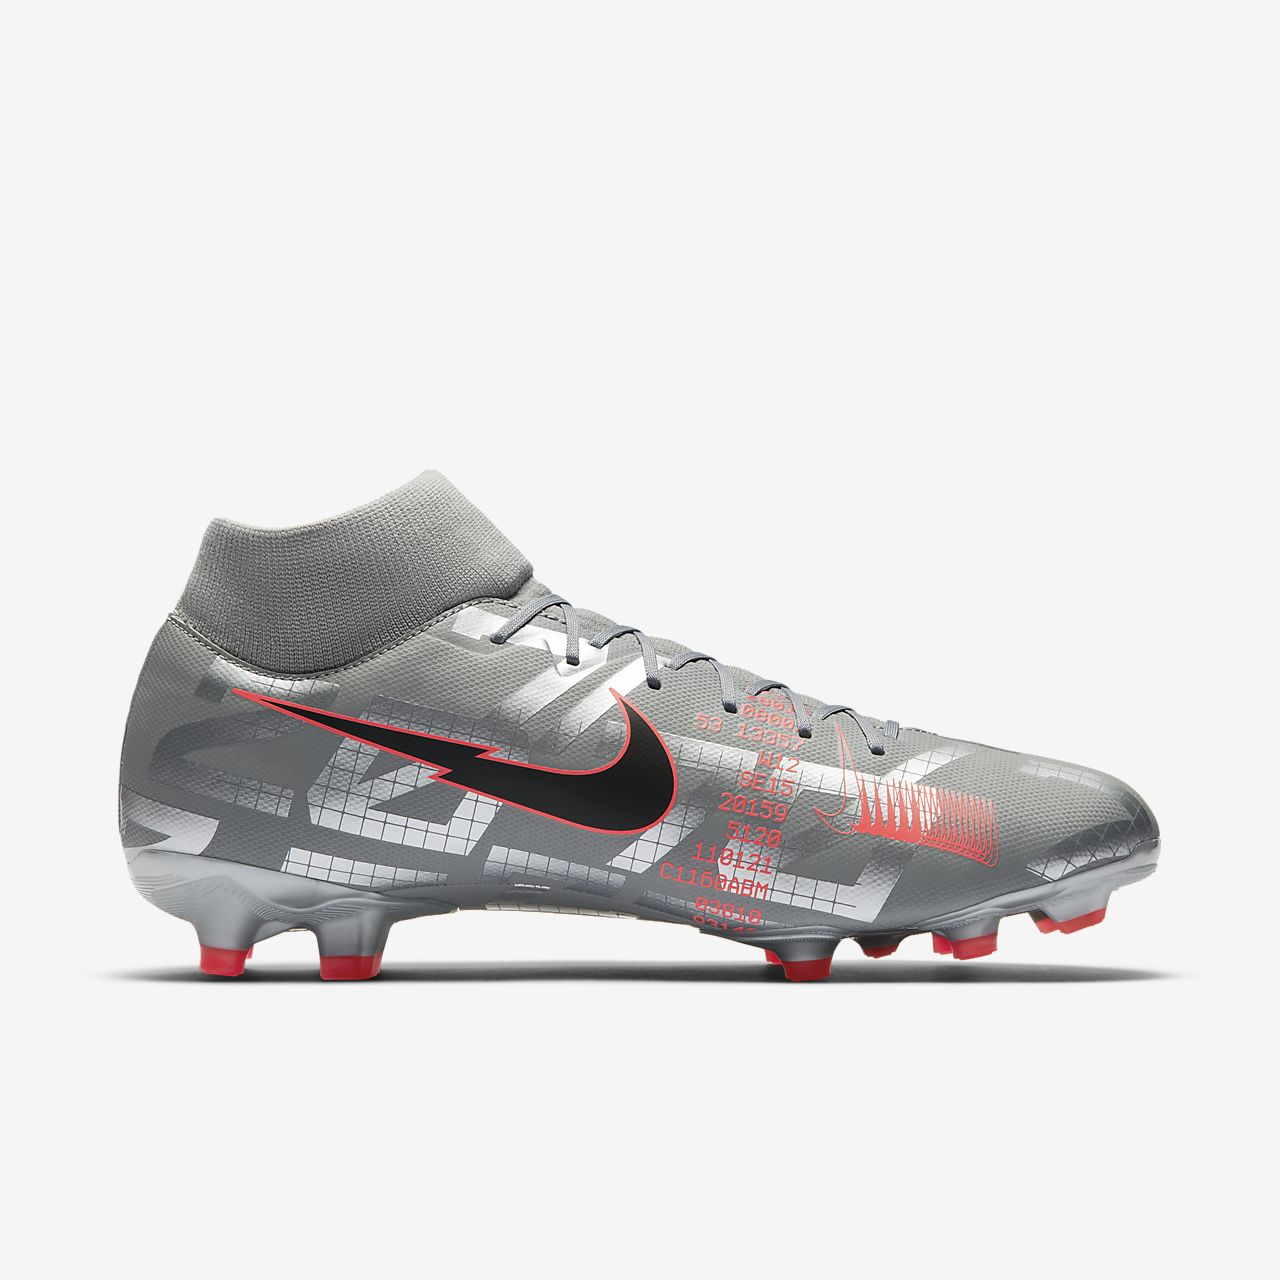 Soccer shoes Child Nike Mercurial Superfly VI Academy MG.